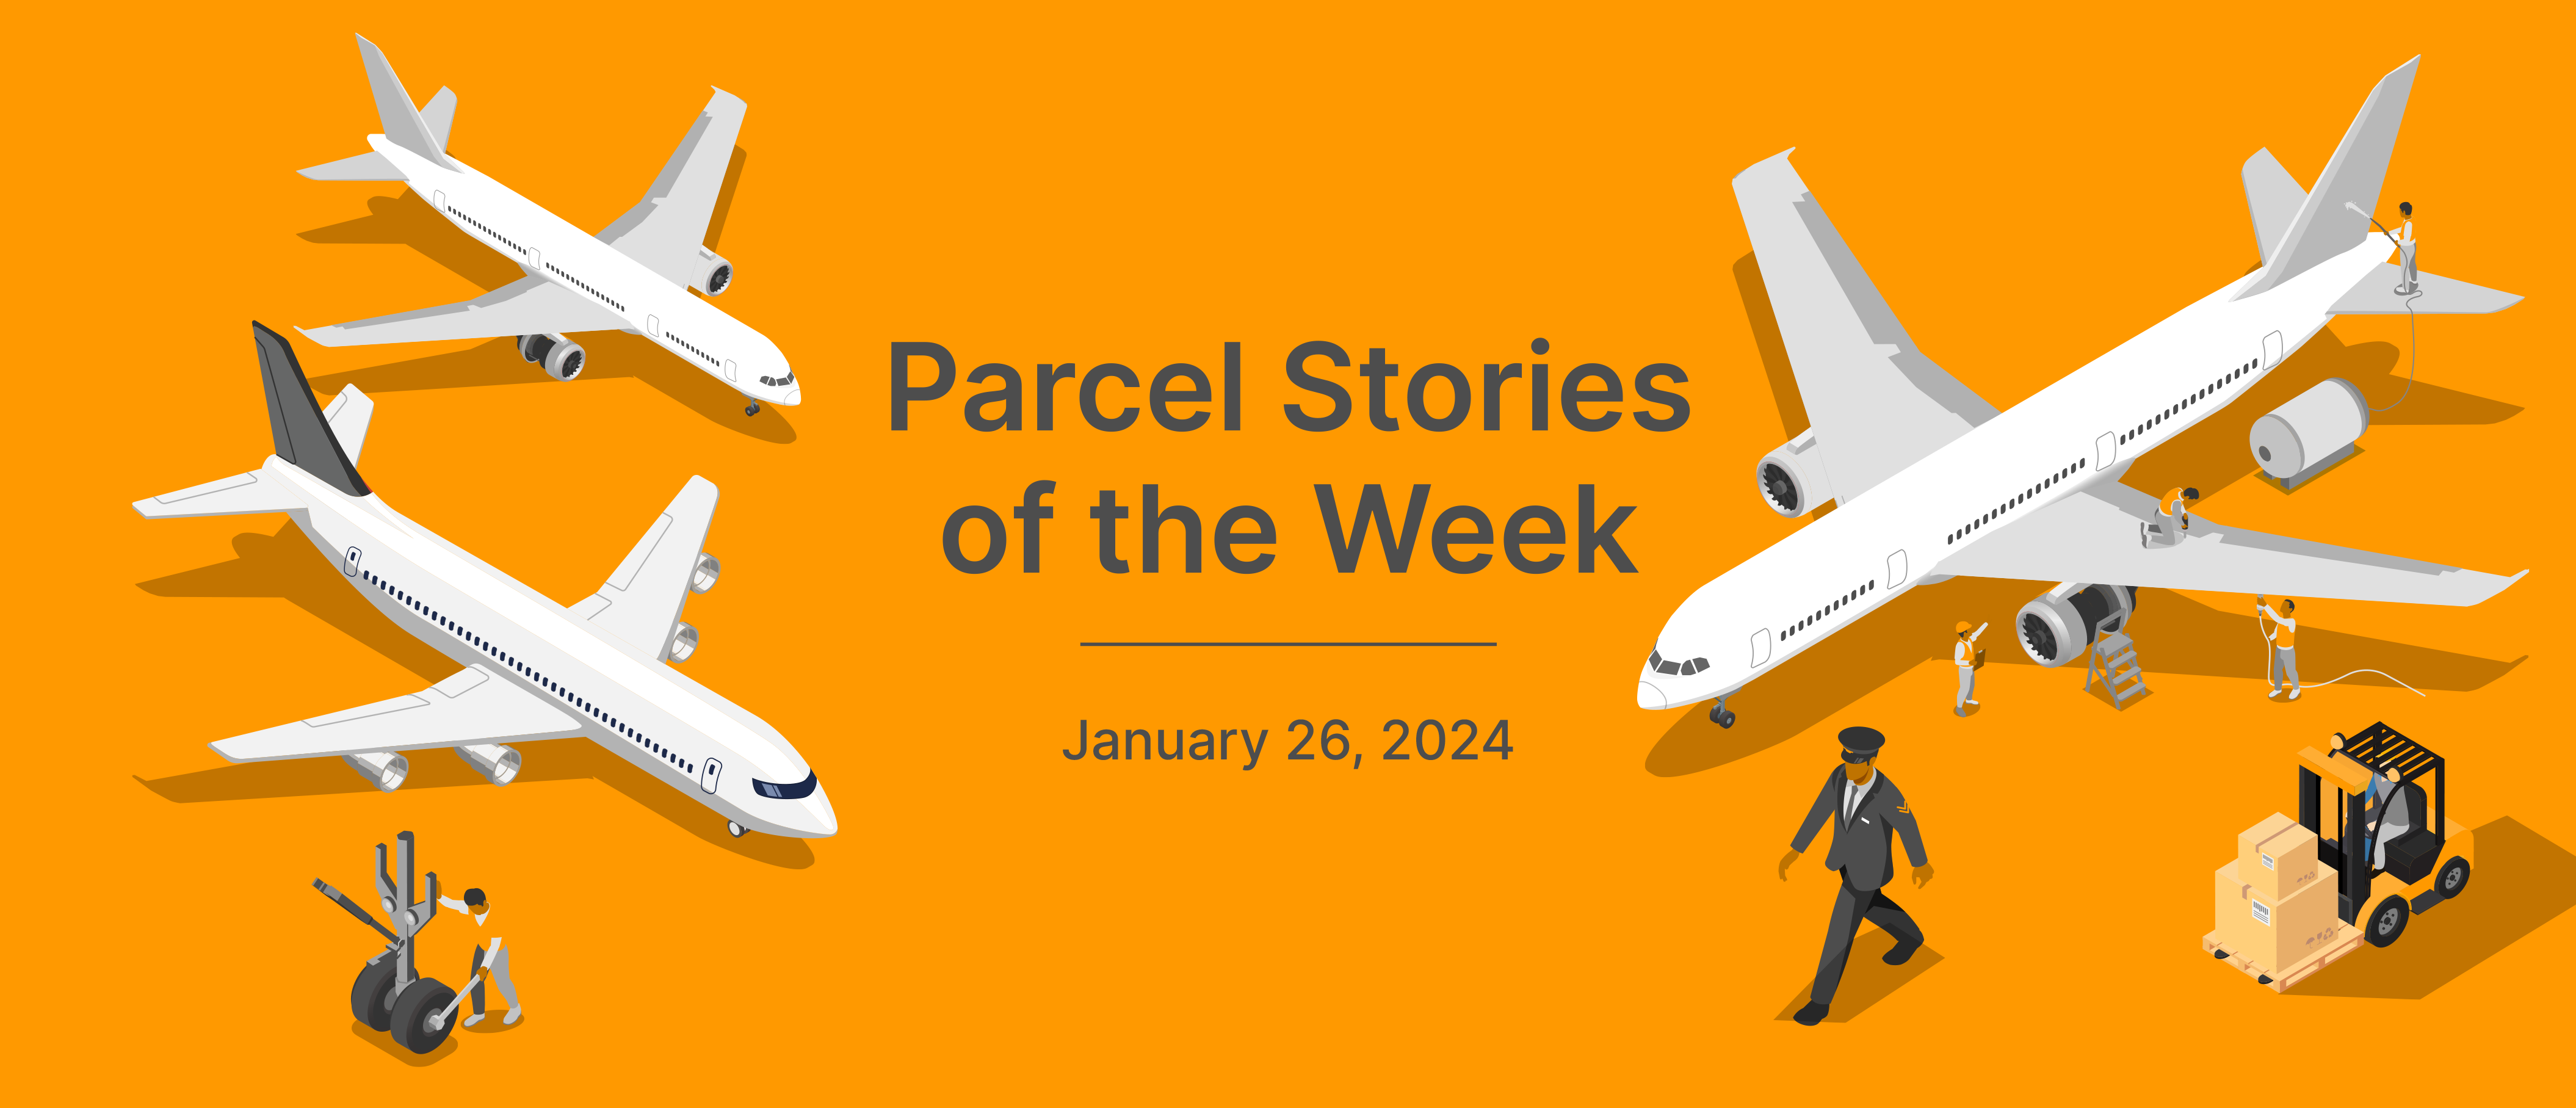 This Week in Parcel: January 26, 2024